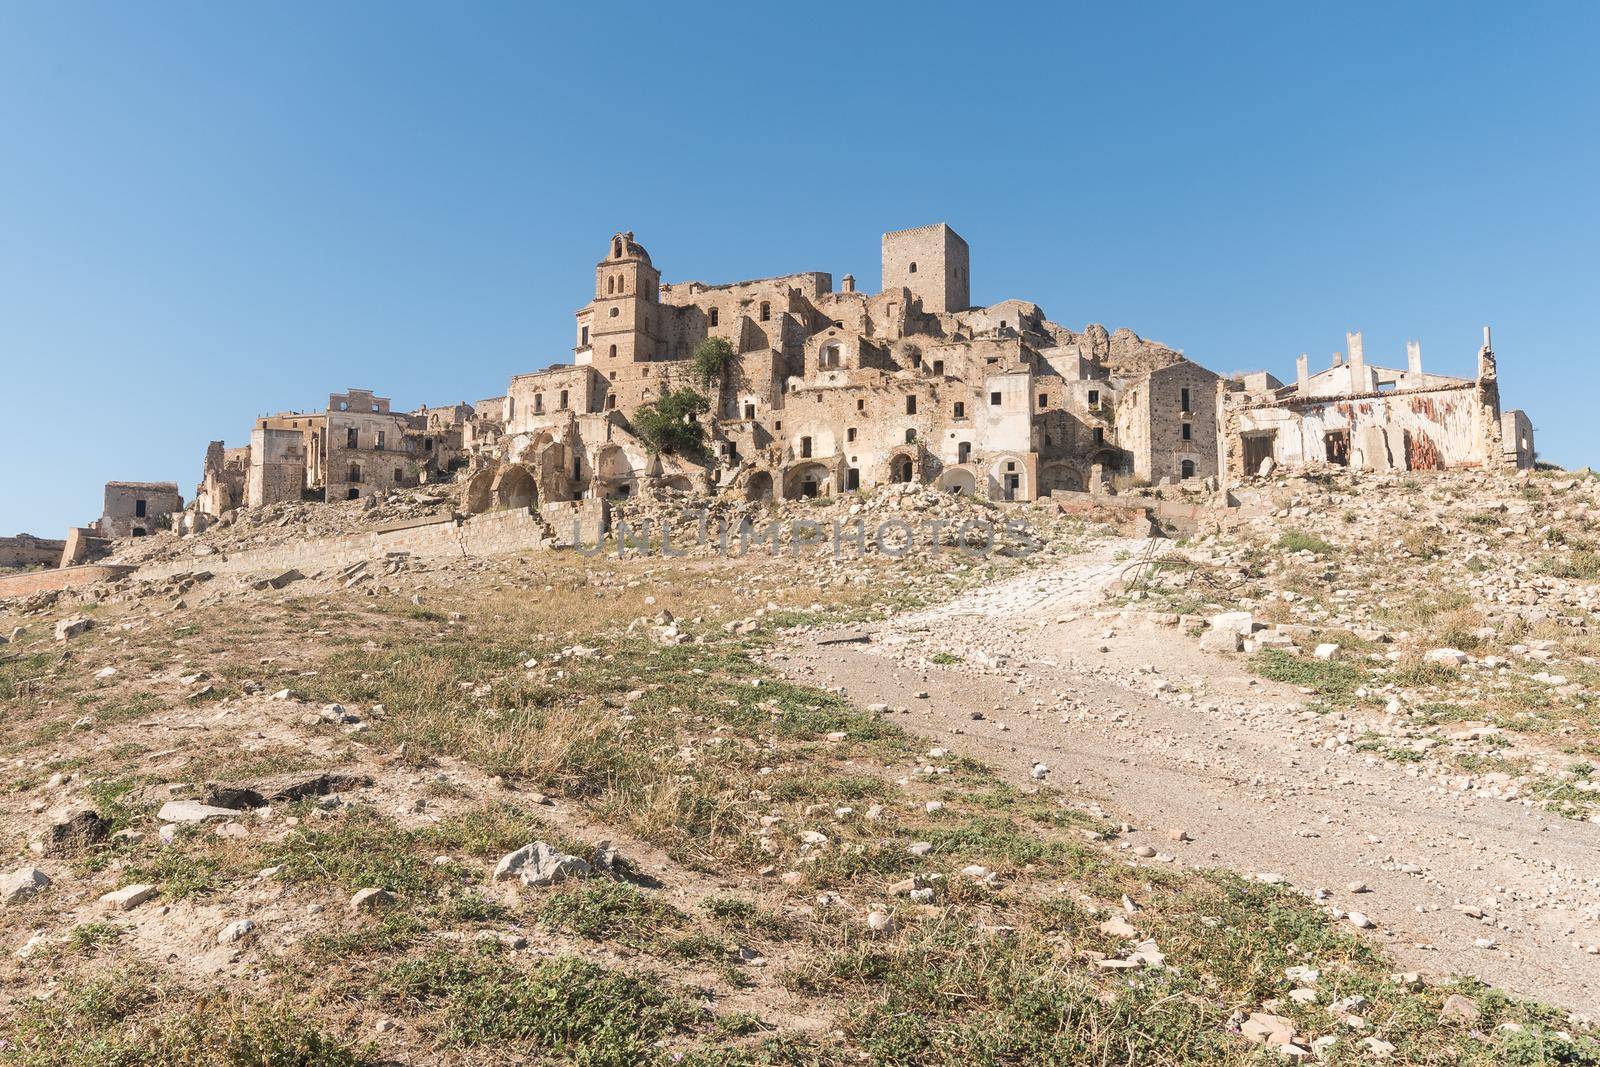 General shot of a mysterious ghost town. Craco, Italy.